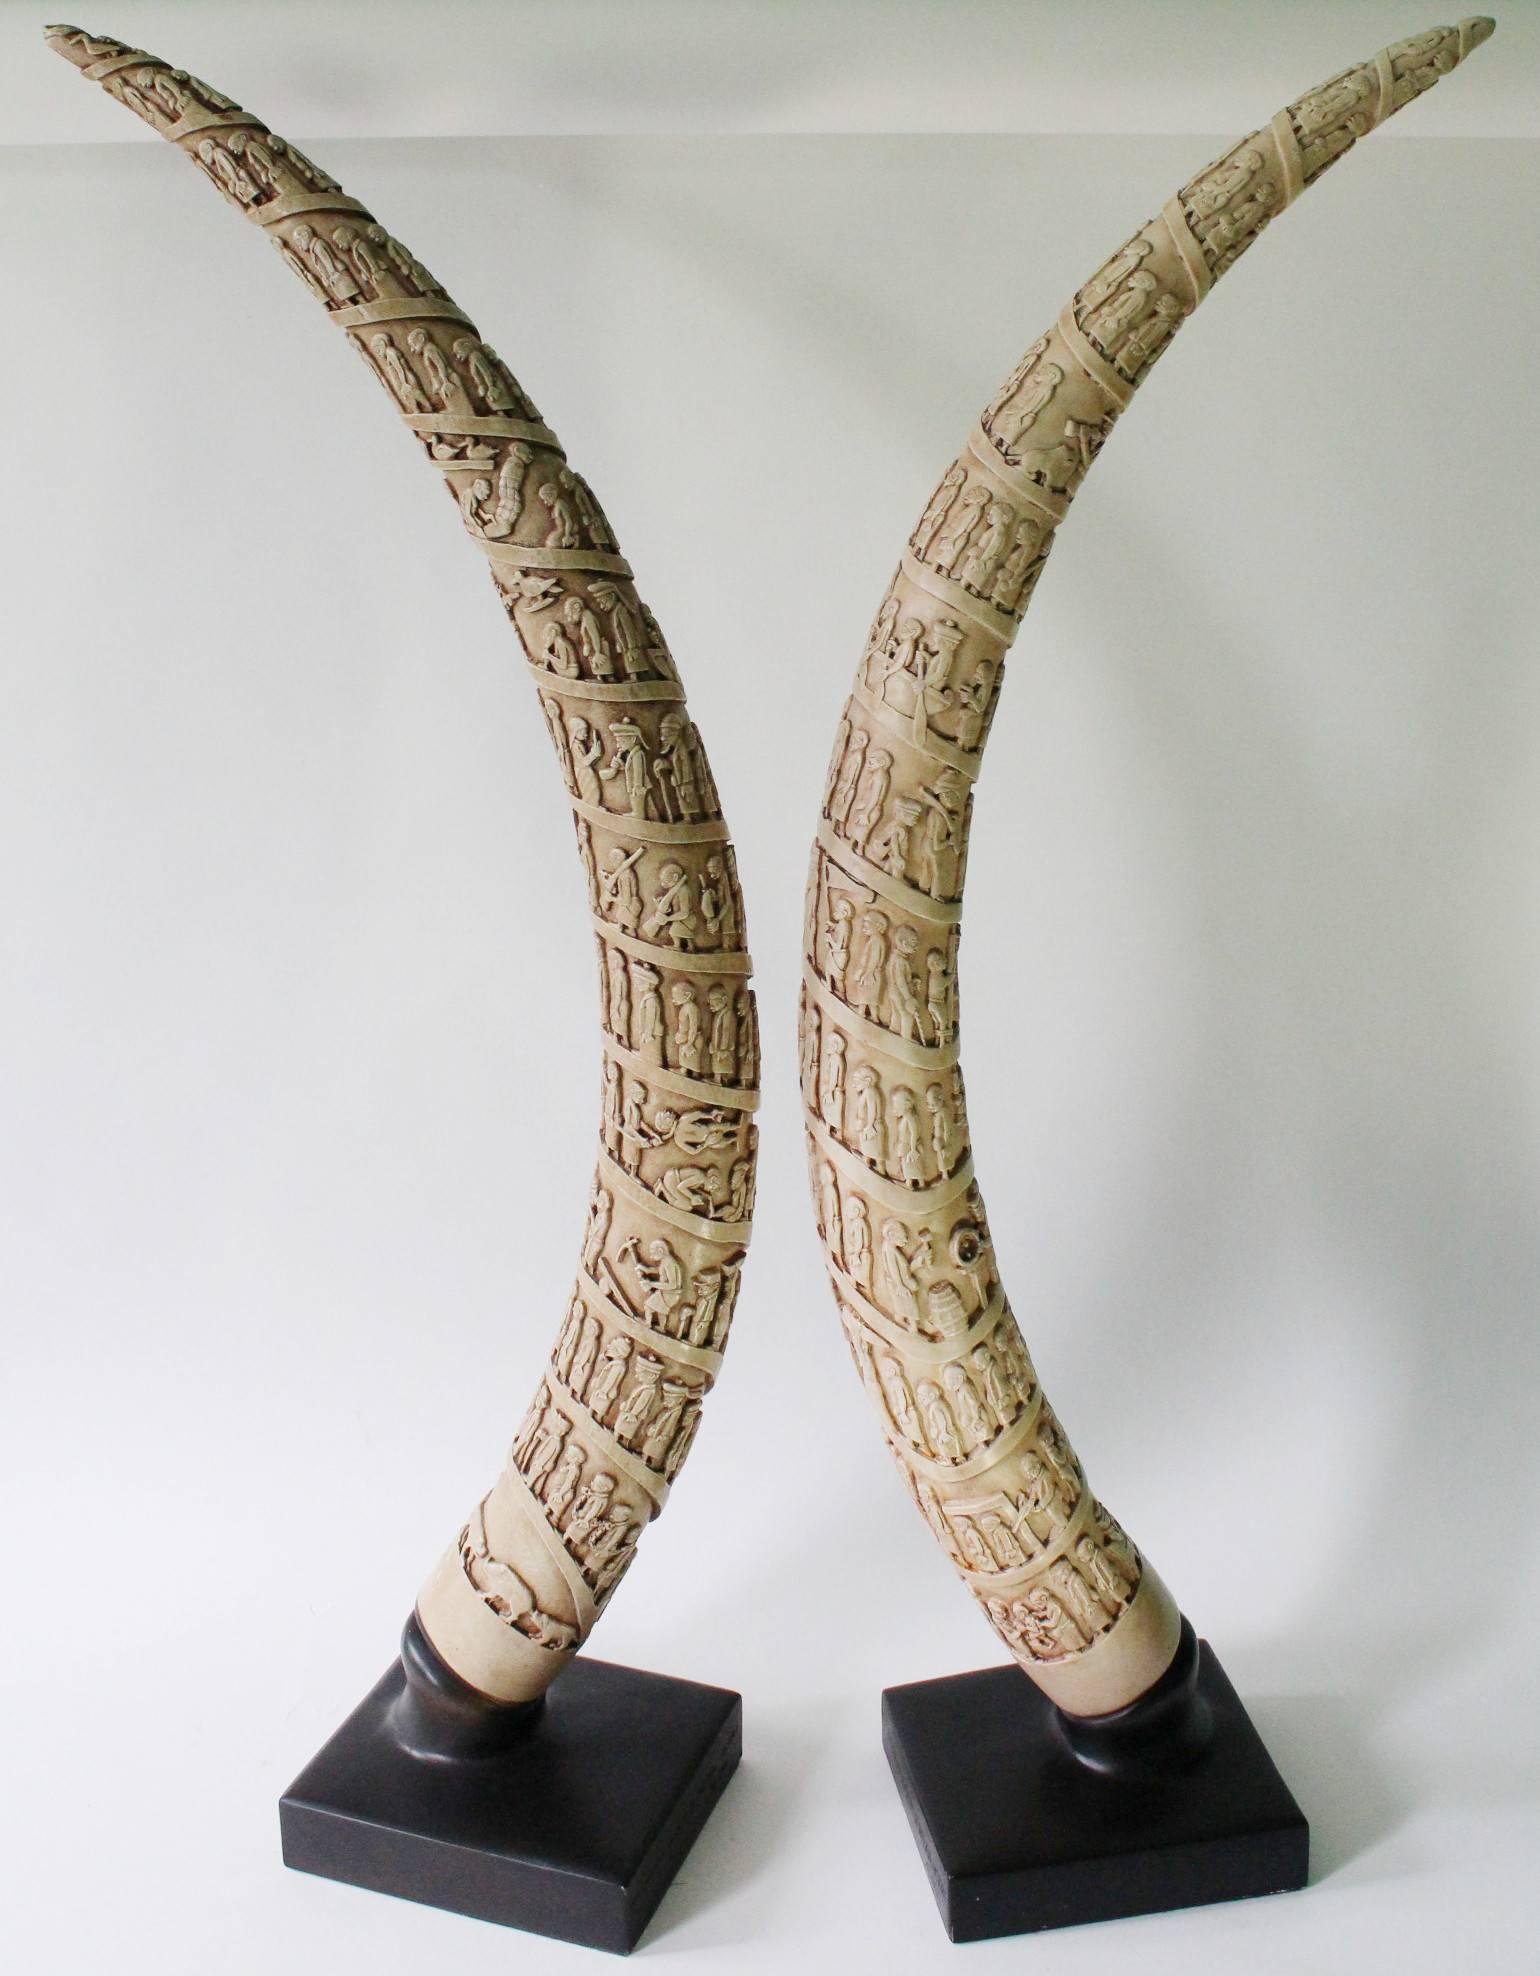 These tusks were made for the Museum of Natural History in 1986. Each consists of molded plaster which has been painted to make the tusks resemble ivory. The carvings feature ritual motifs. Each is in very good condition.

110512.